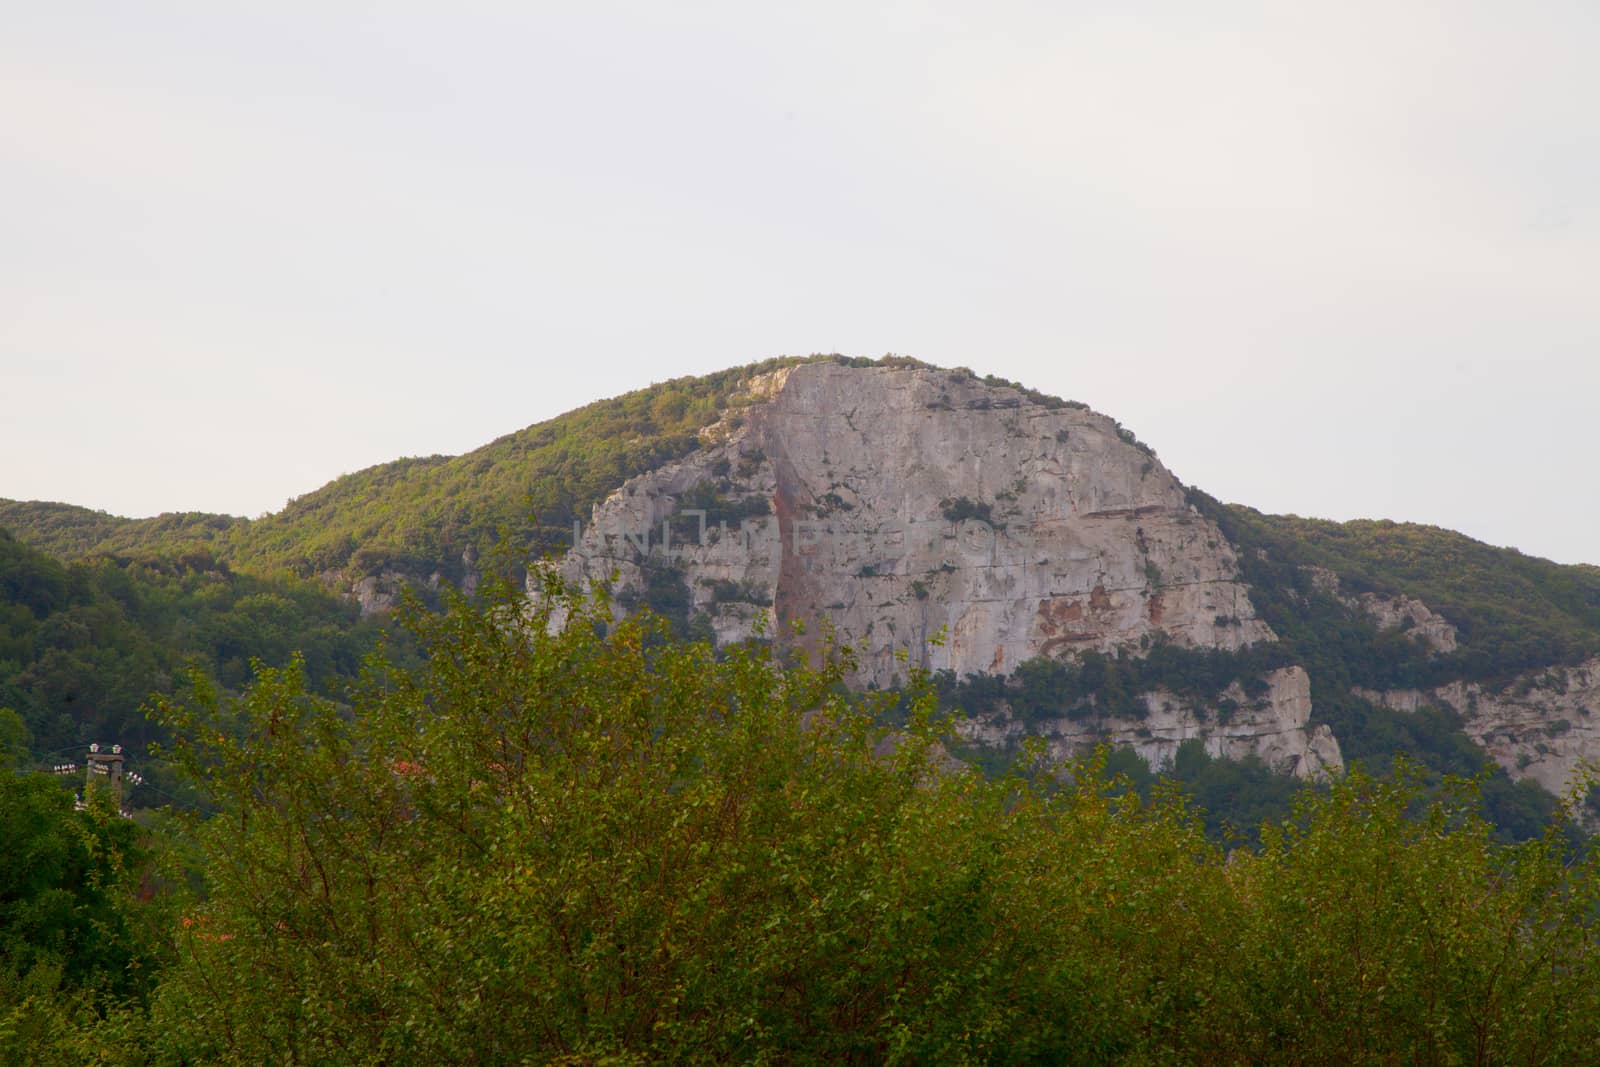 Hill with cliffs and many trees, horizontal image